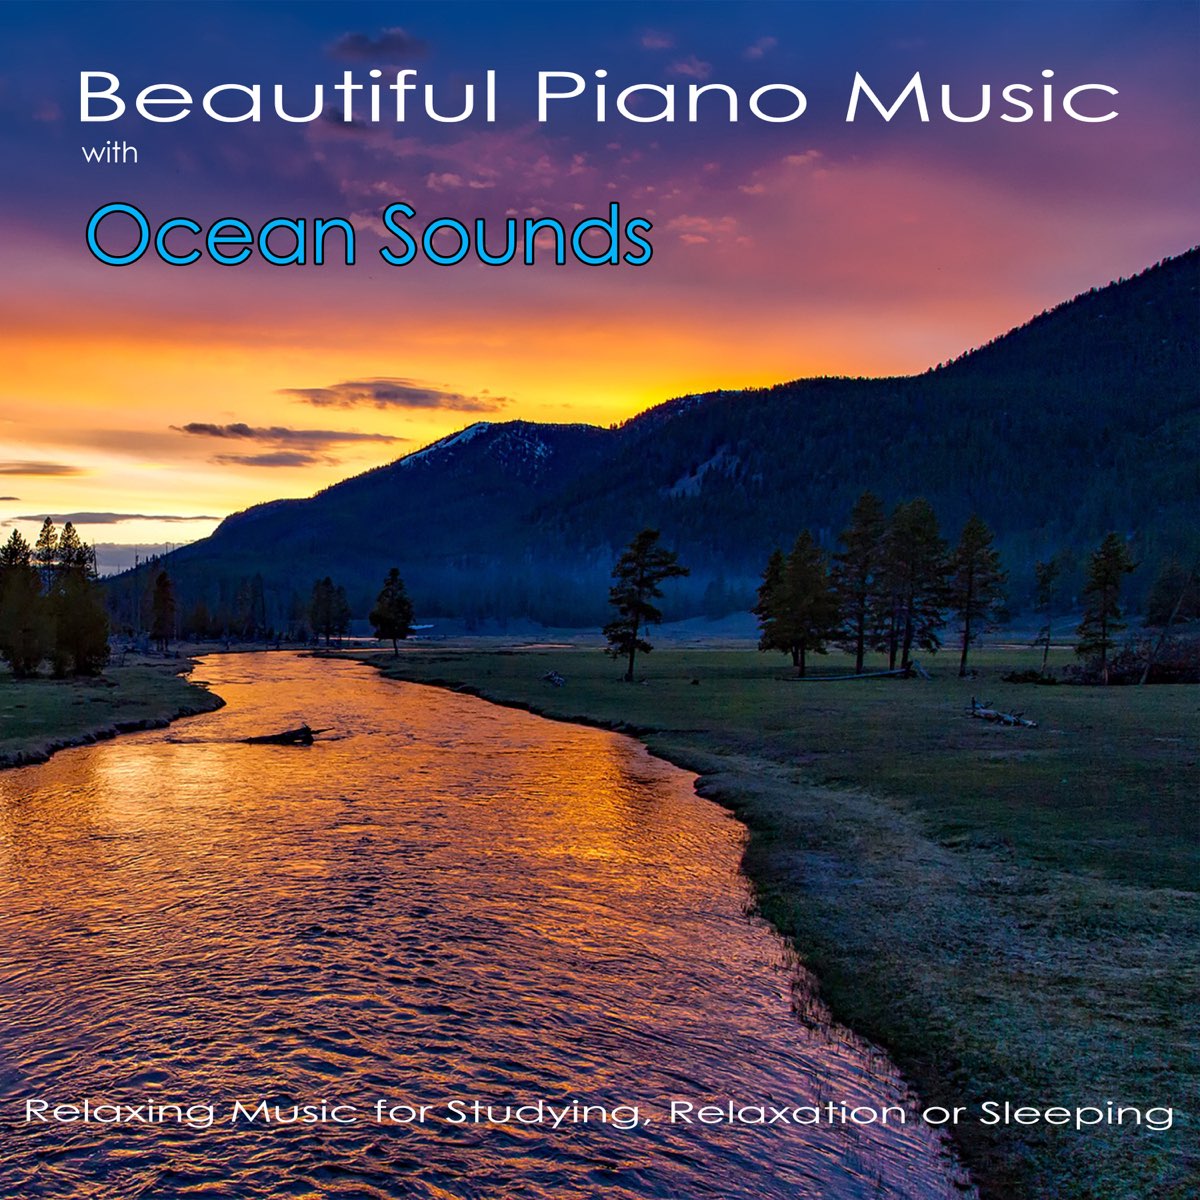 Beautiful Piano Music with Ocean Sounds: Relaxing Music for Studying,  Relaxation or Sleeping by Romantic Piano Music Academy, Nature Sounds  Academy & Ocean Sounds Academy on Apple Music